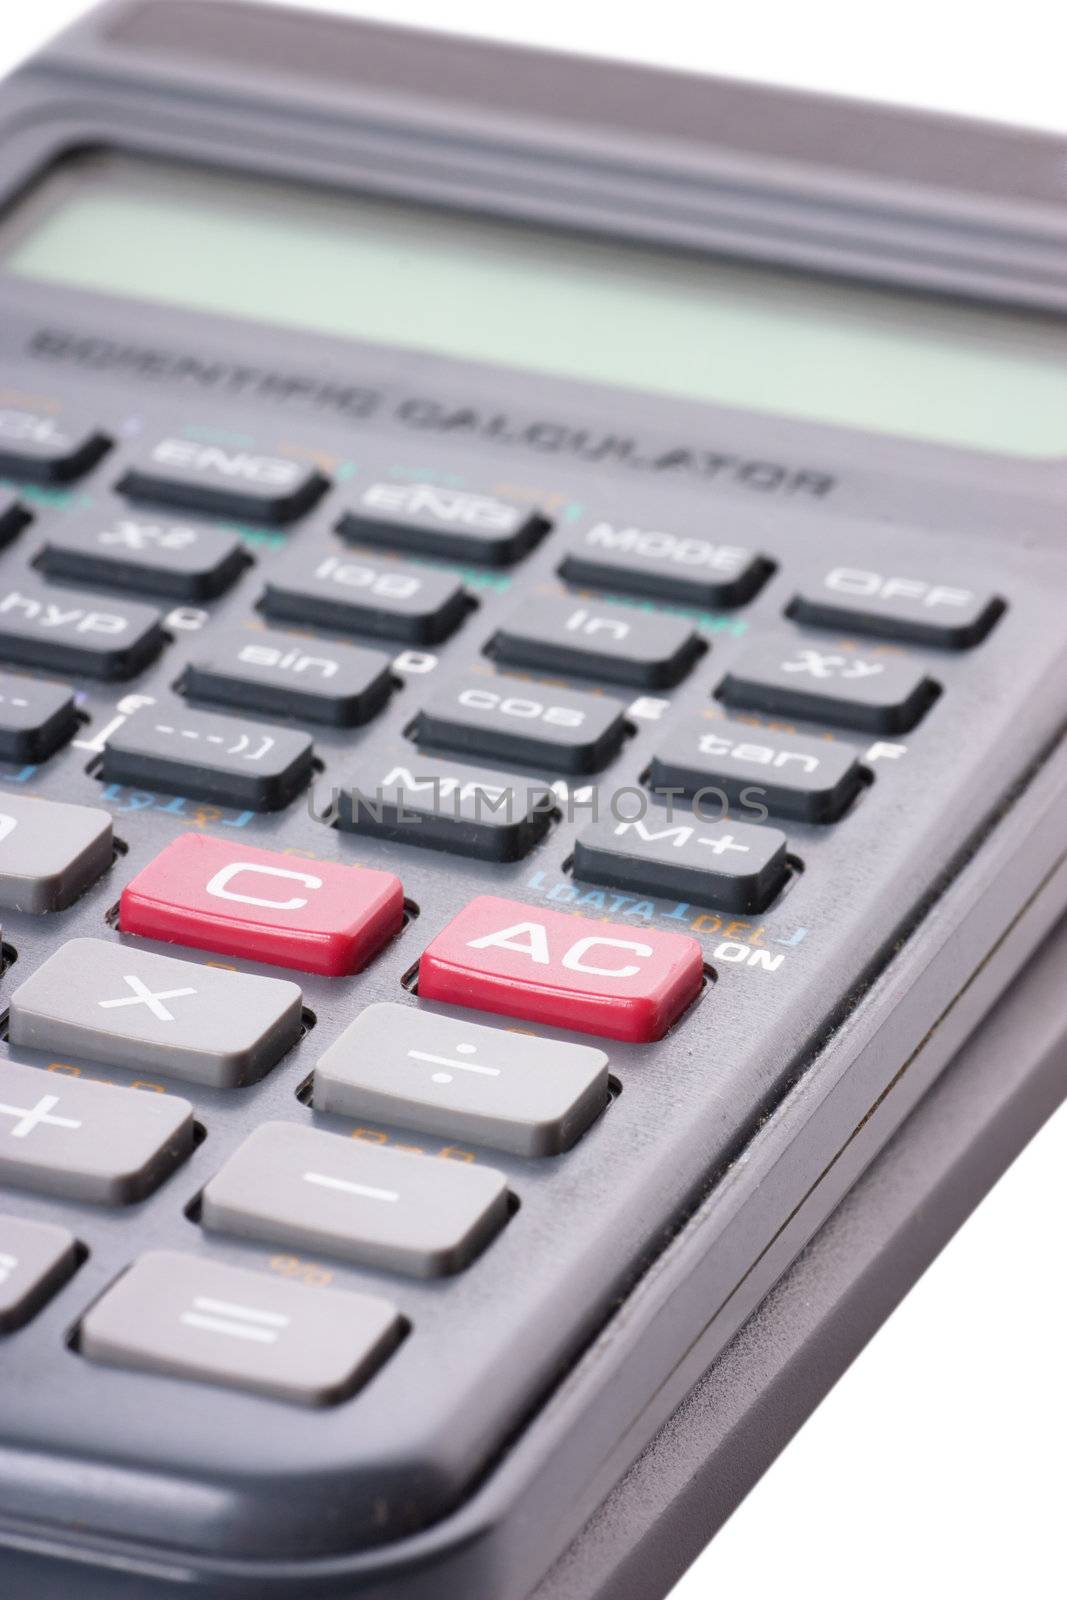 Closeup view of scintific calculator over white background